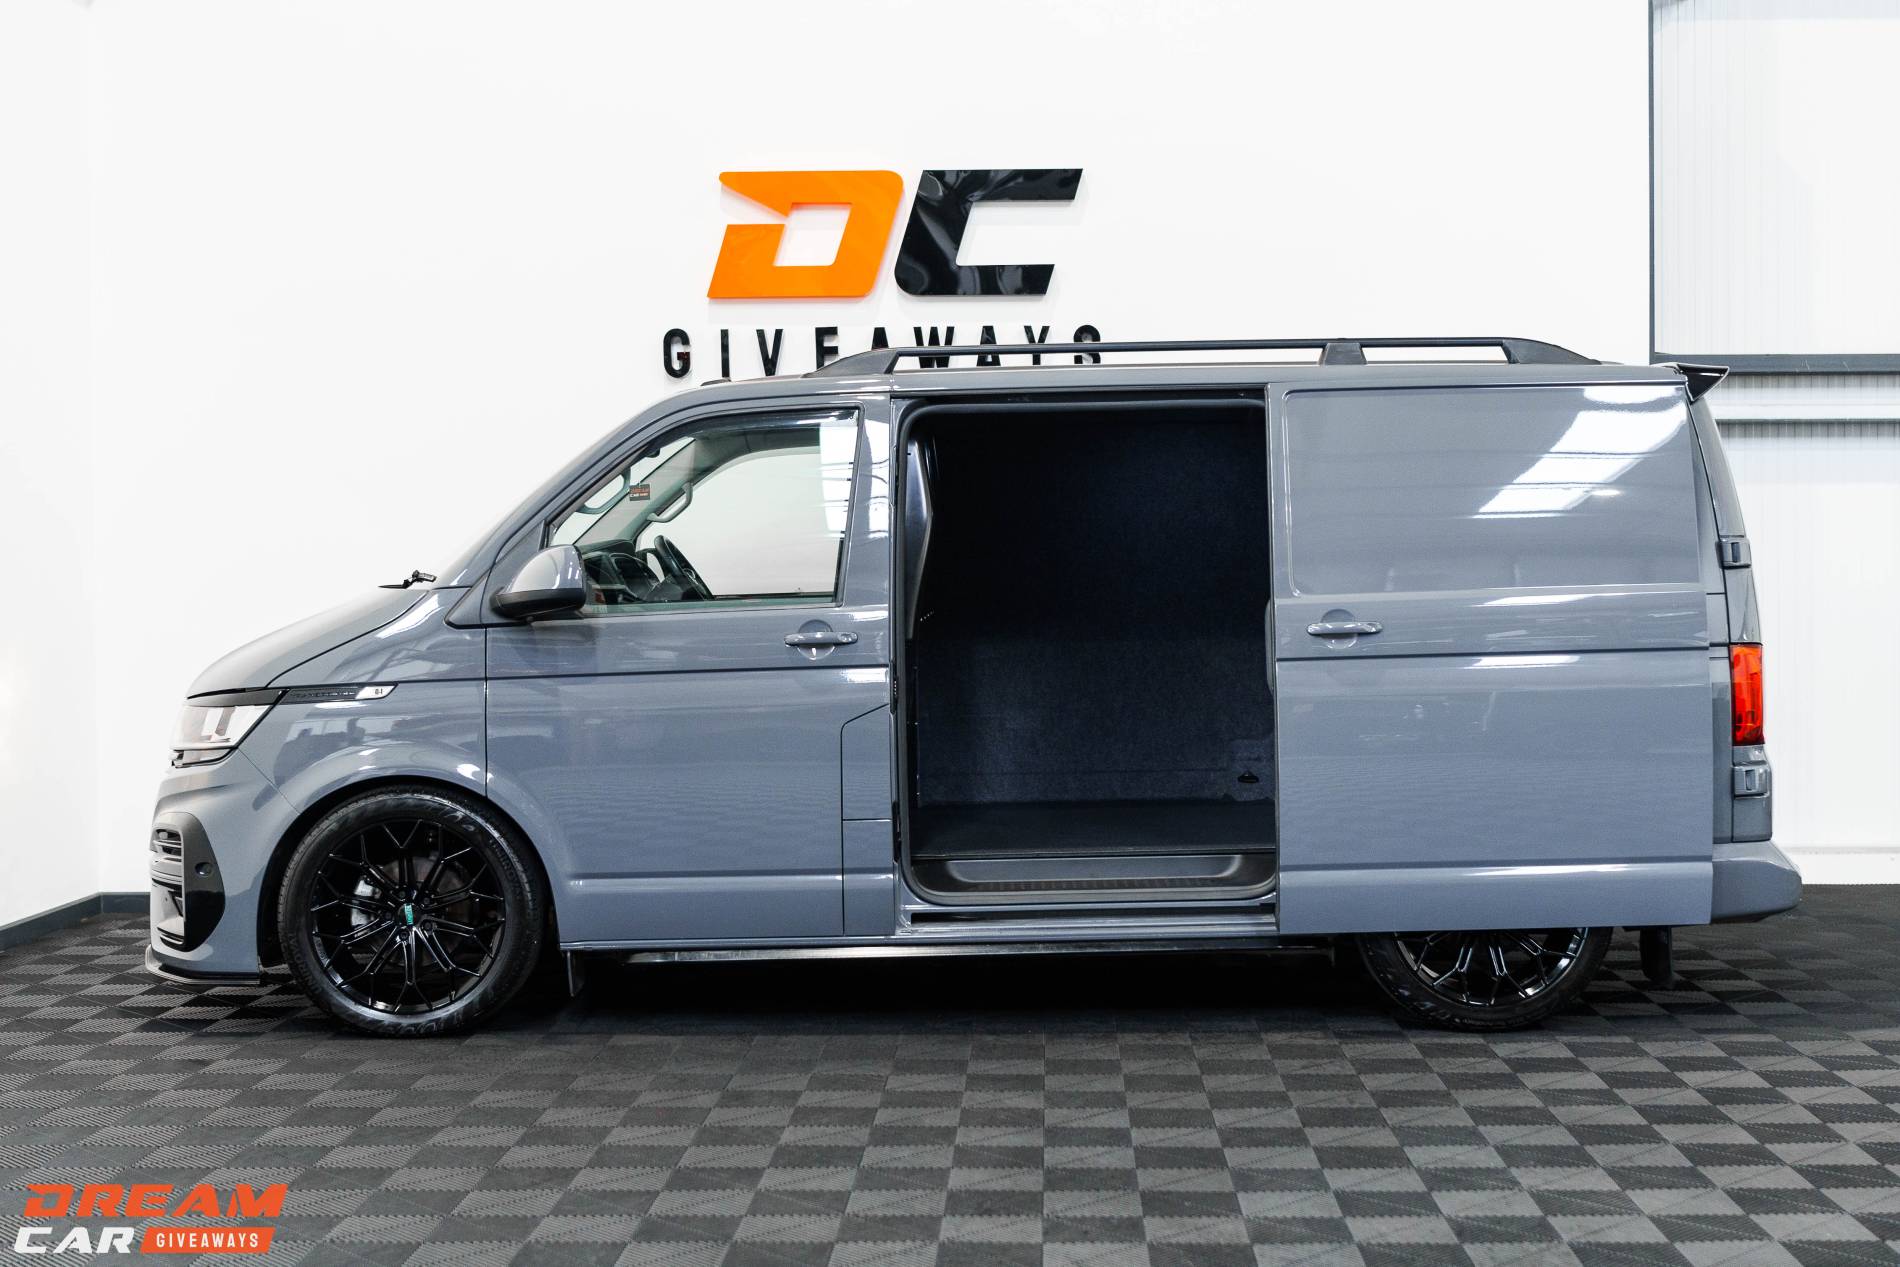 Win this 2020 Transporter T6.1 T28 & £5,000 or £28,000 Tax Free